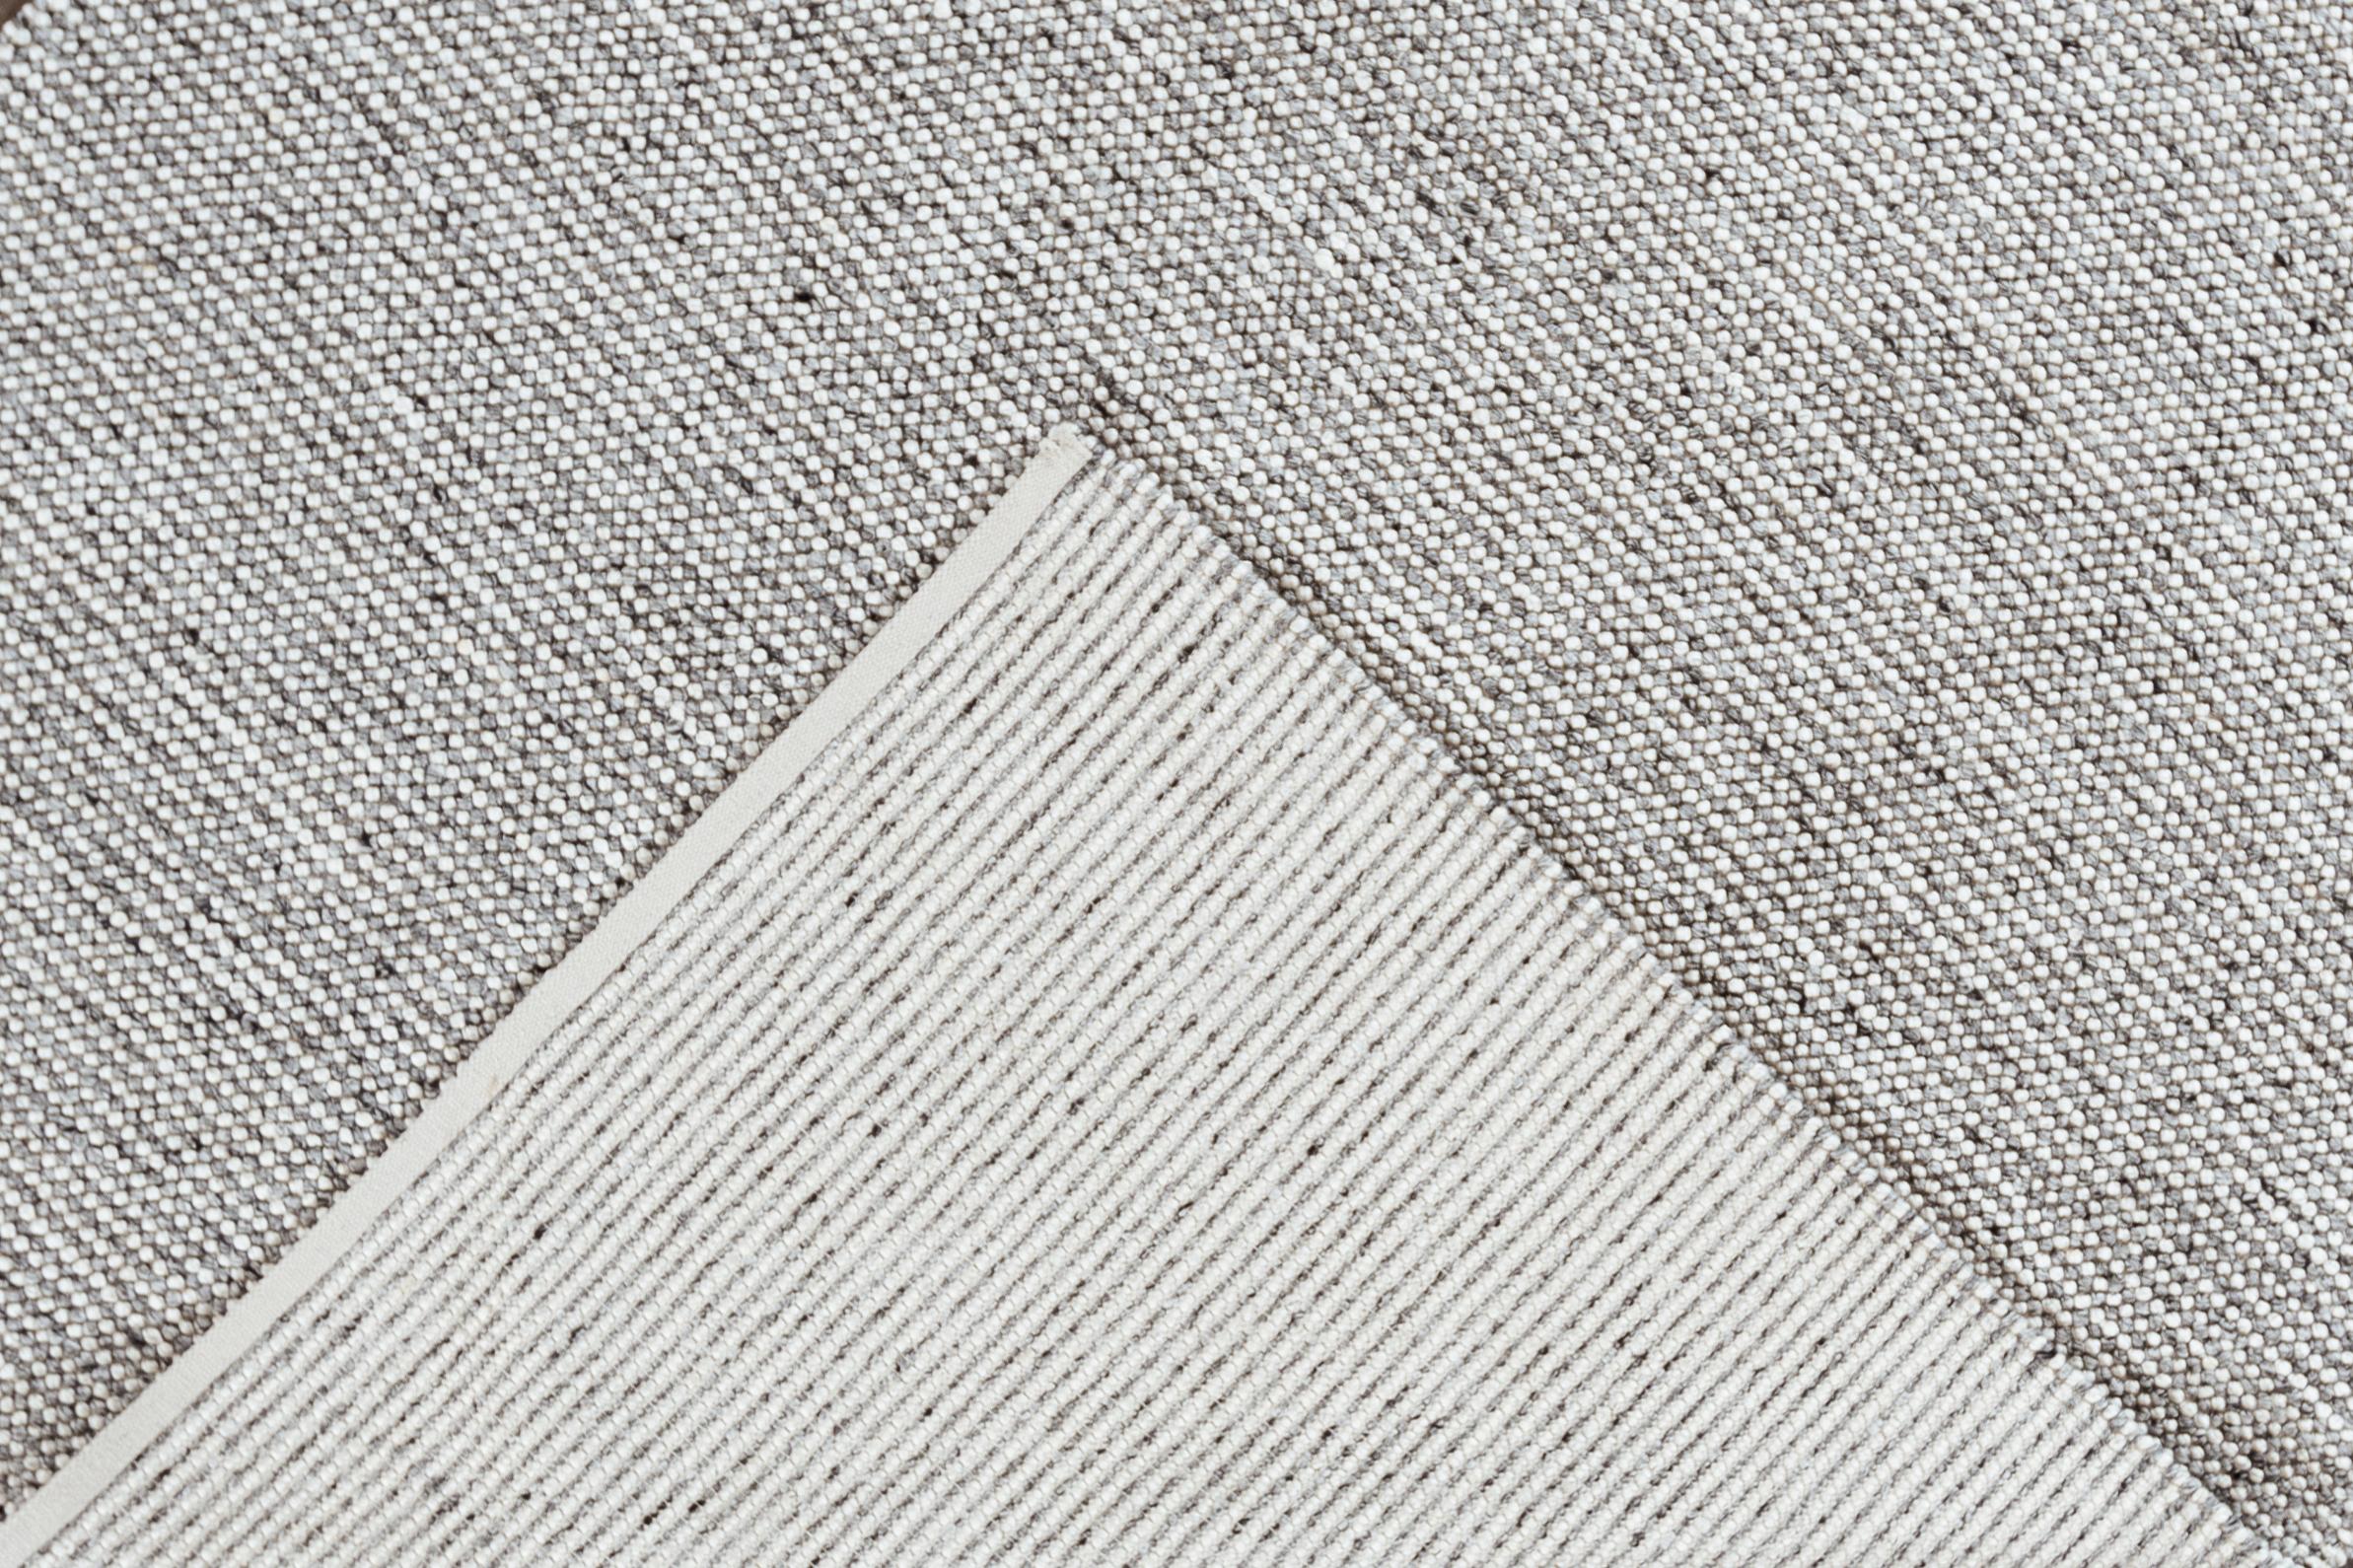 A 21st century modern handwoven textured wool rug with a solid gray motif. This rug measures at 8' x 10'2